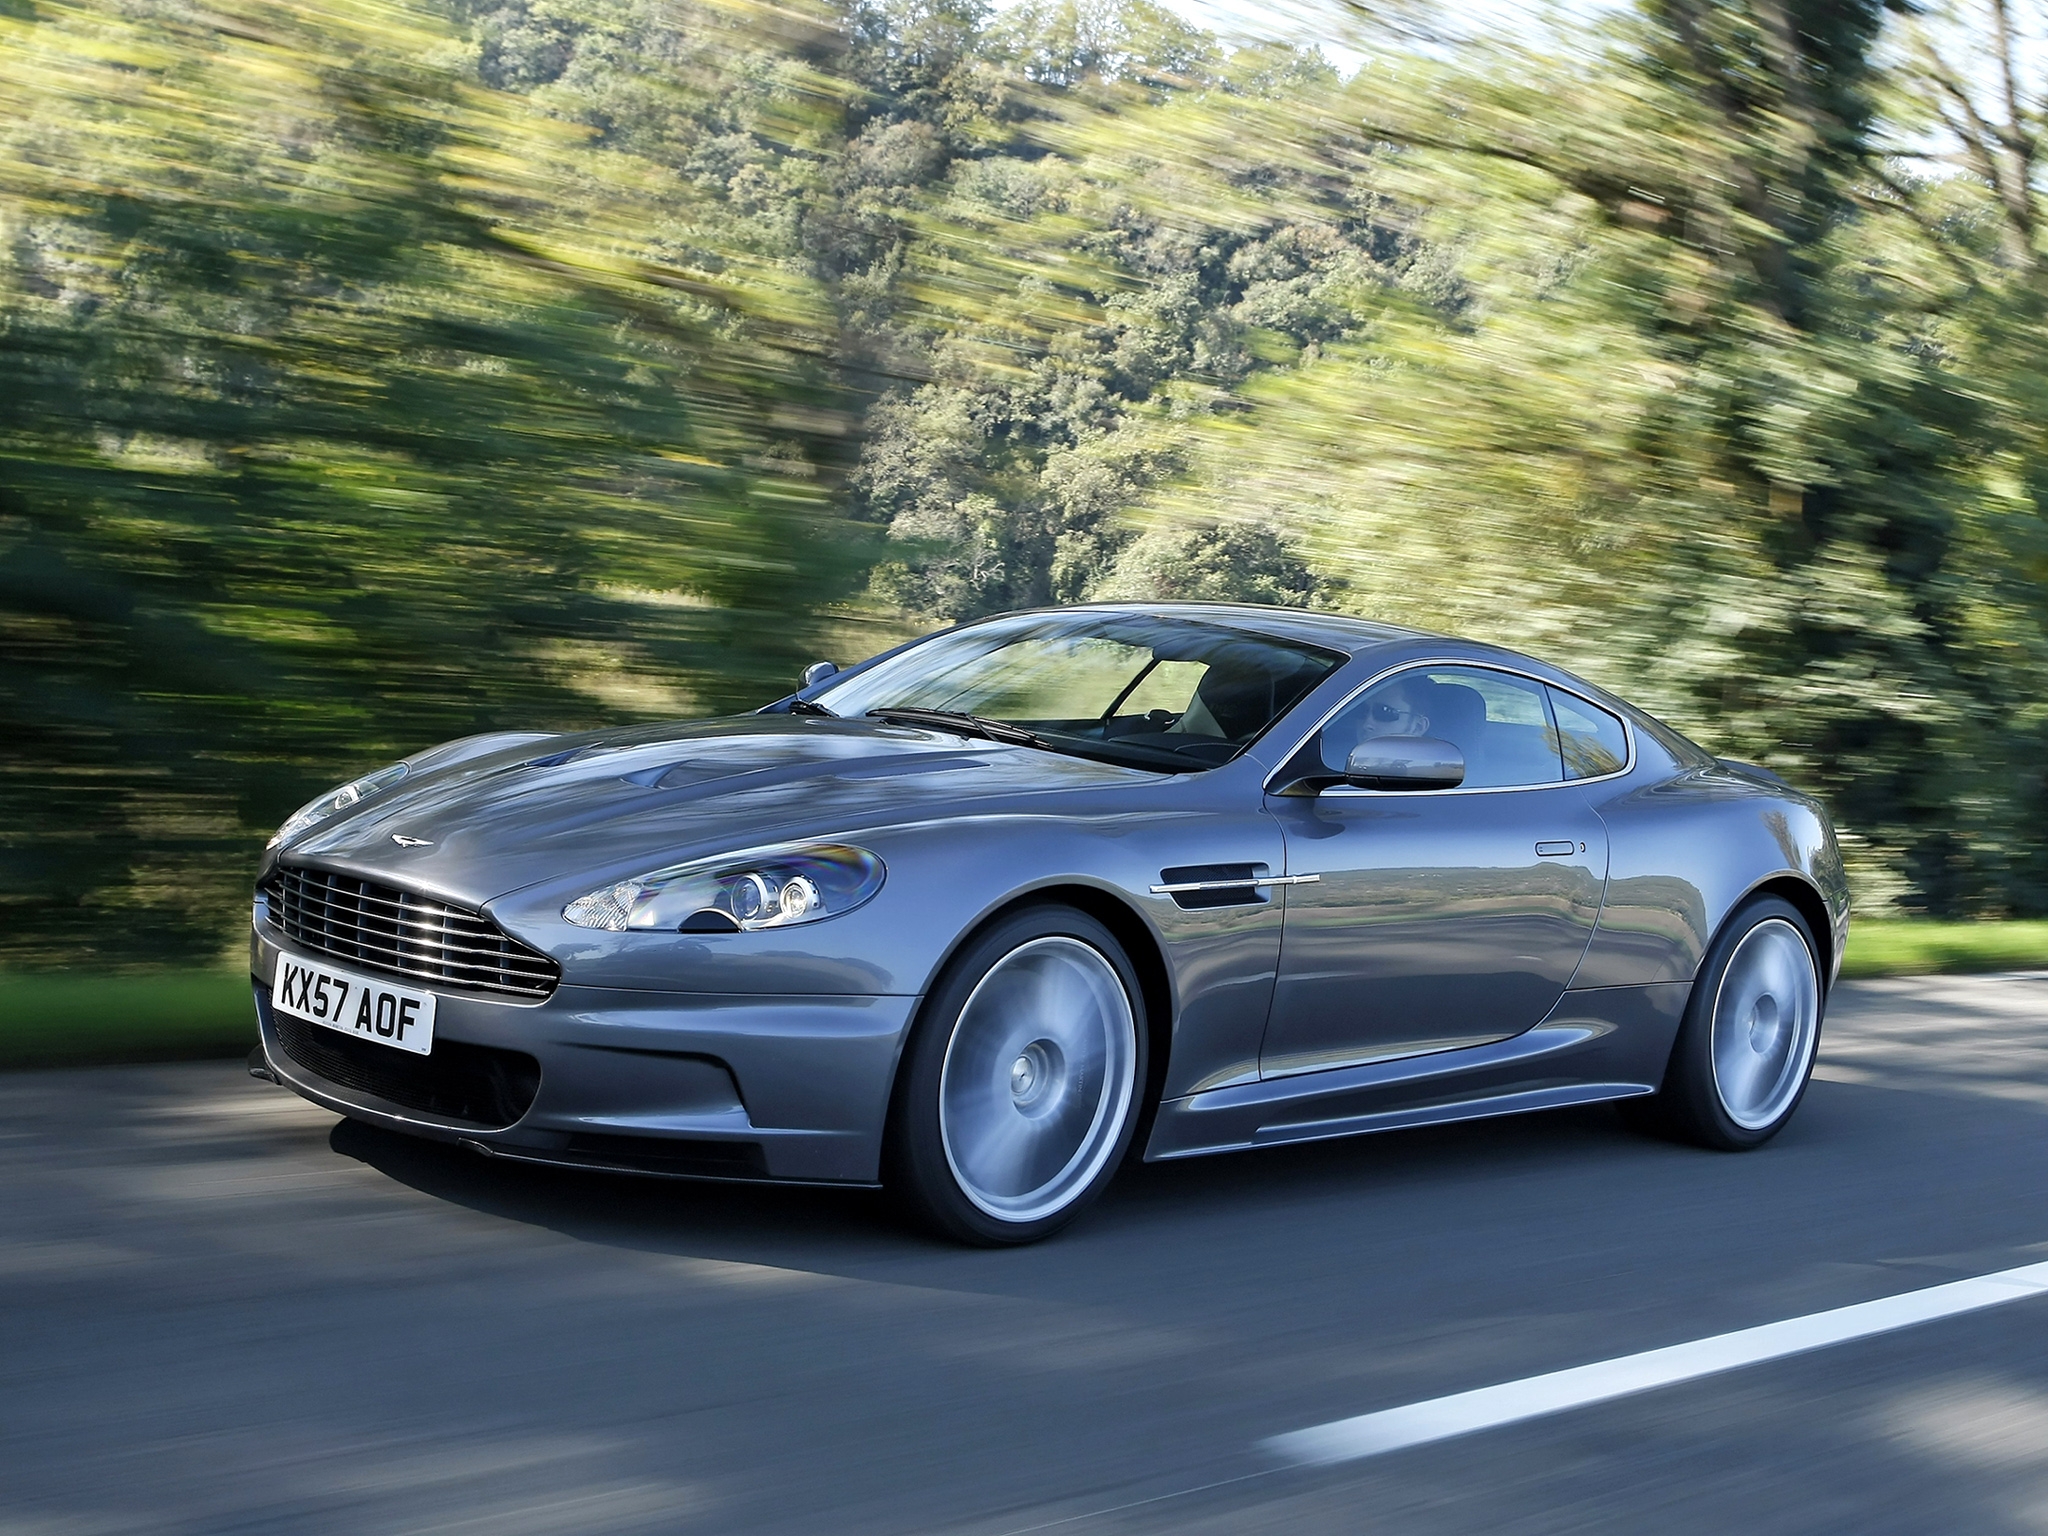 sports, auto, trees, aston martin, cars, grey, side view, dbs, 2008 High Definition image